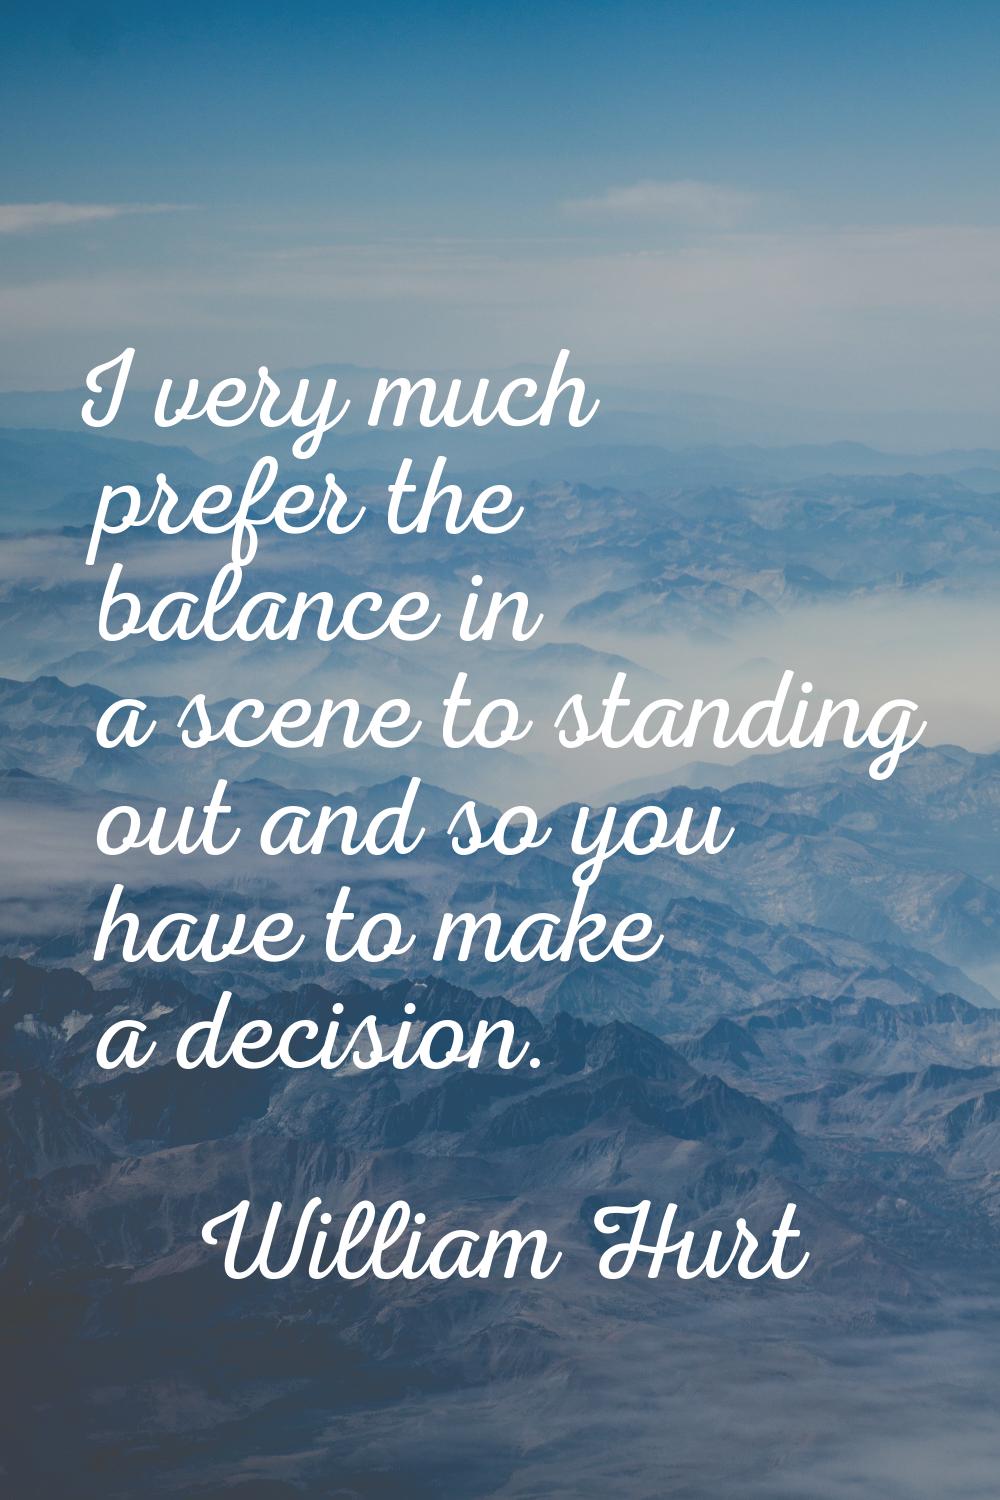 I very much prefer the balance in a scene to standing out and so you have to make a decision.